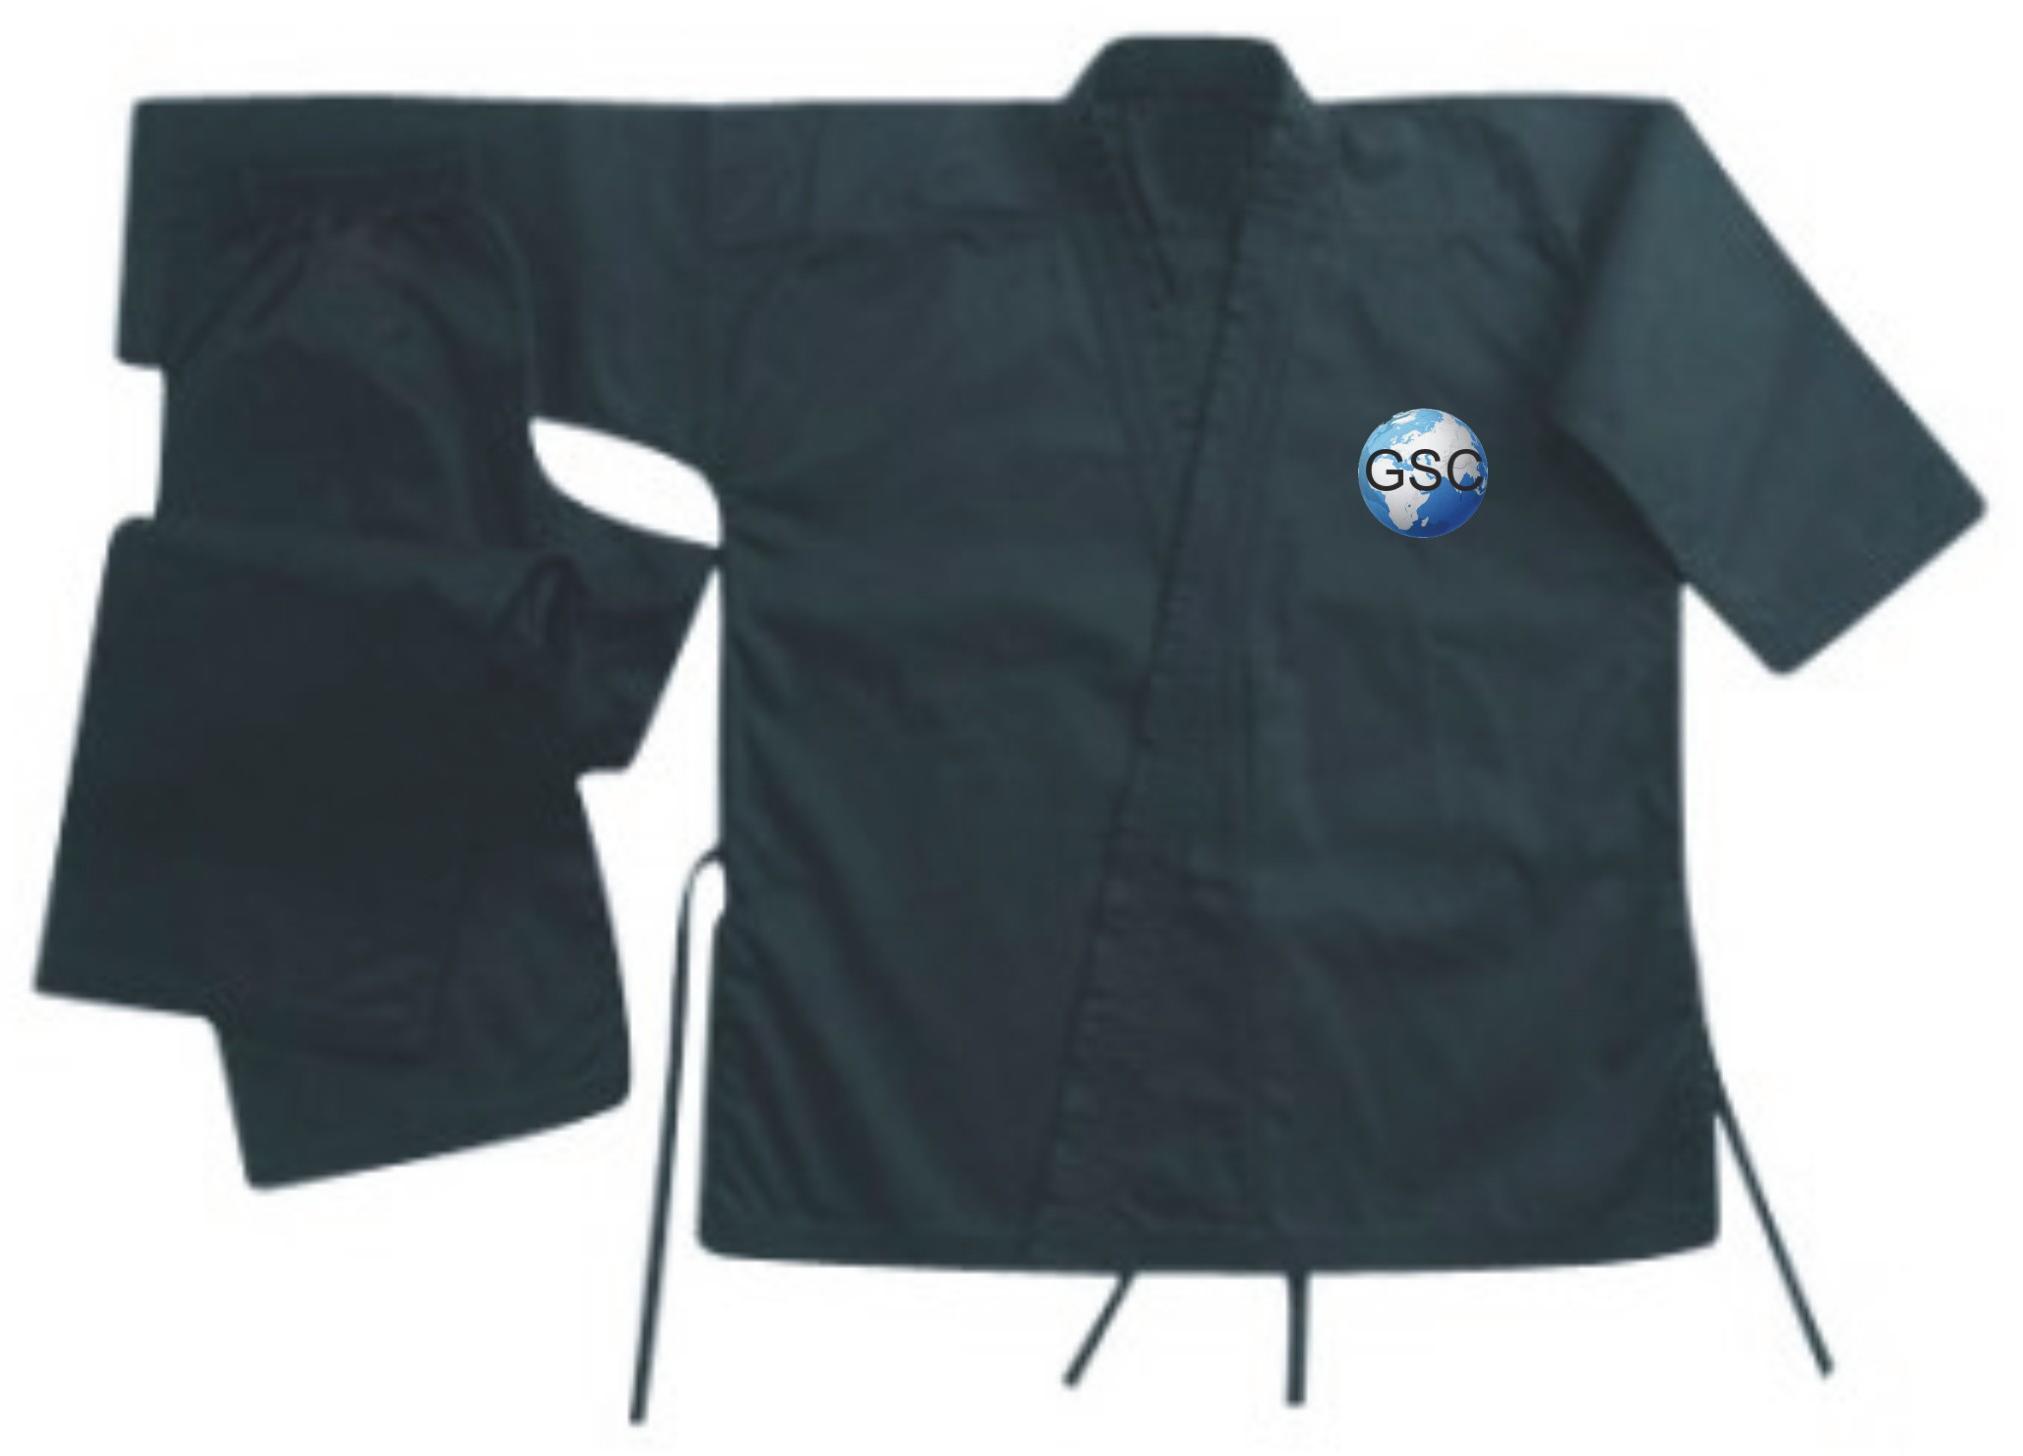 Exporter of Judo Uniforms, Pakistan by gsc-sports